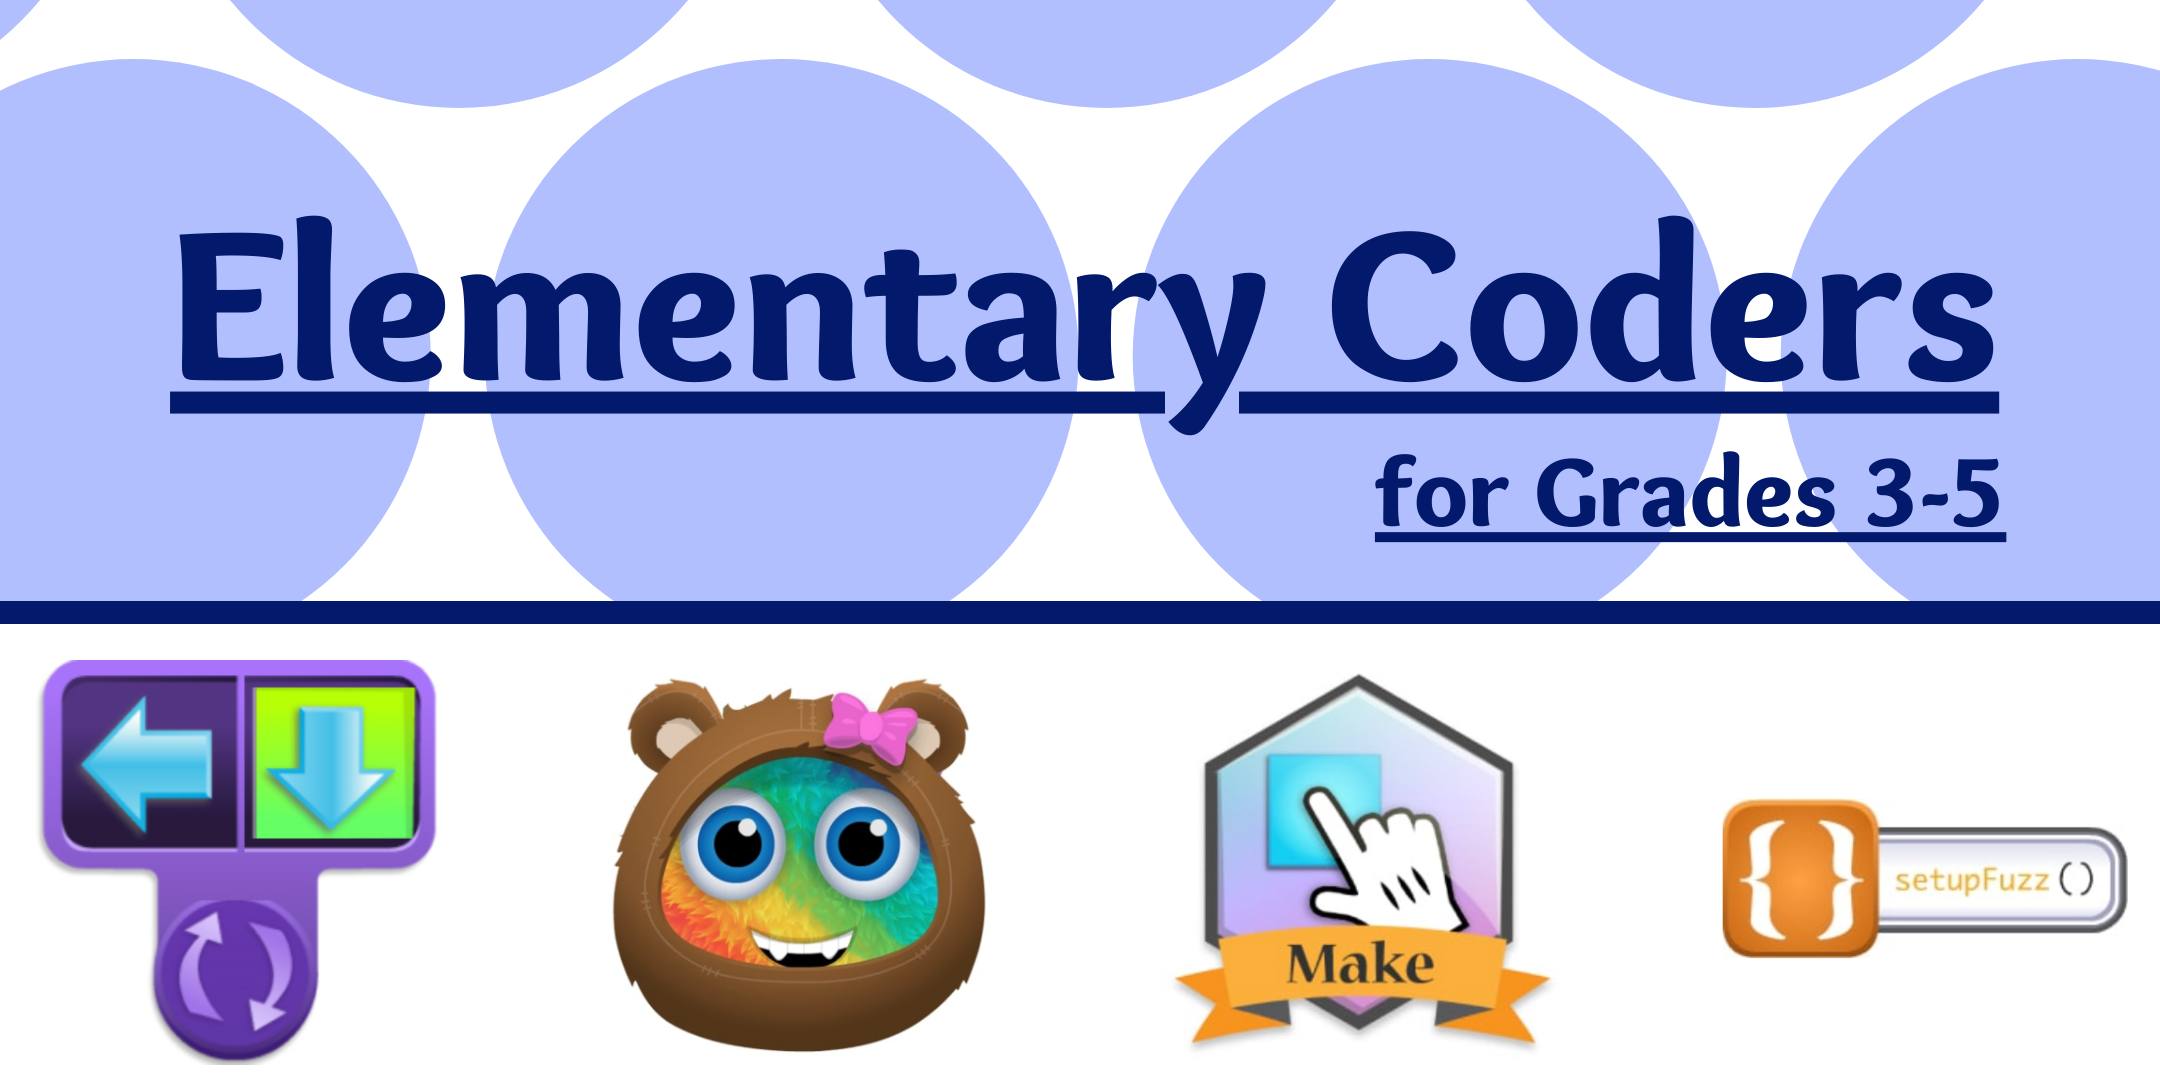 Elementary Coders for Grades 3–5 event image